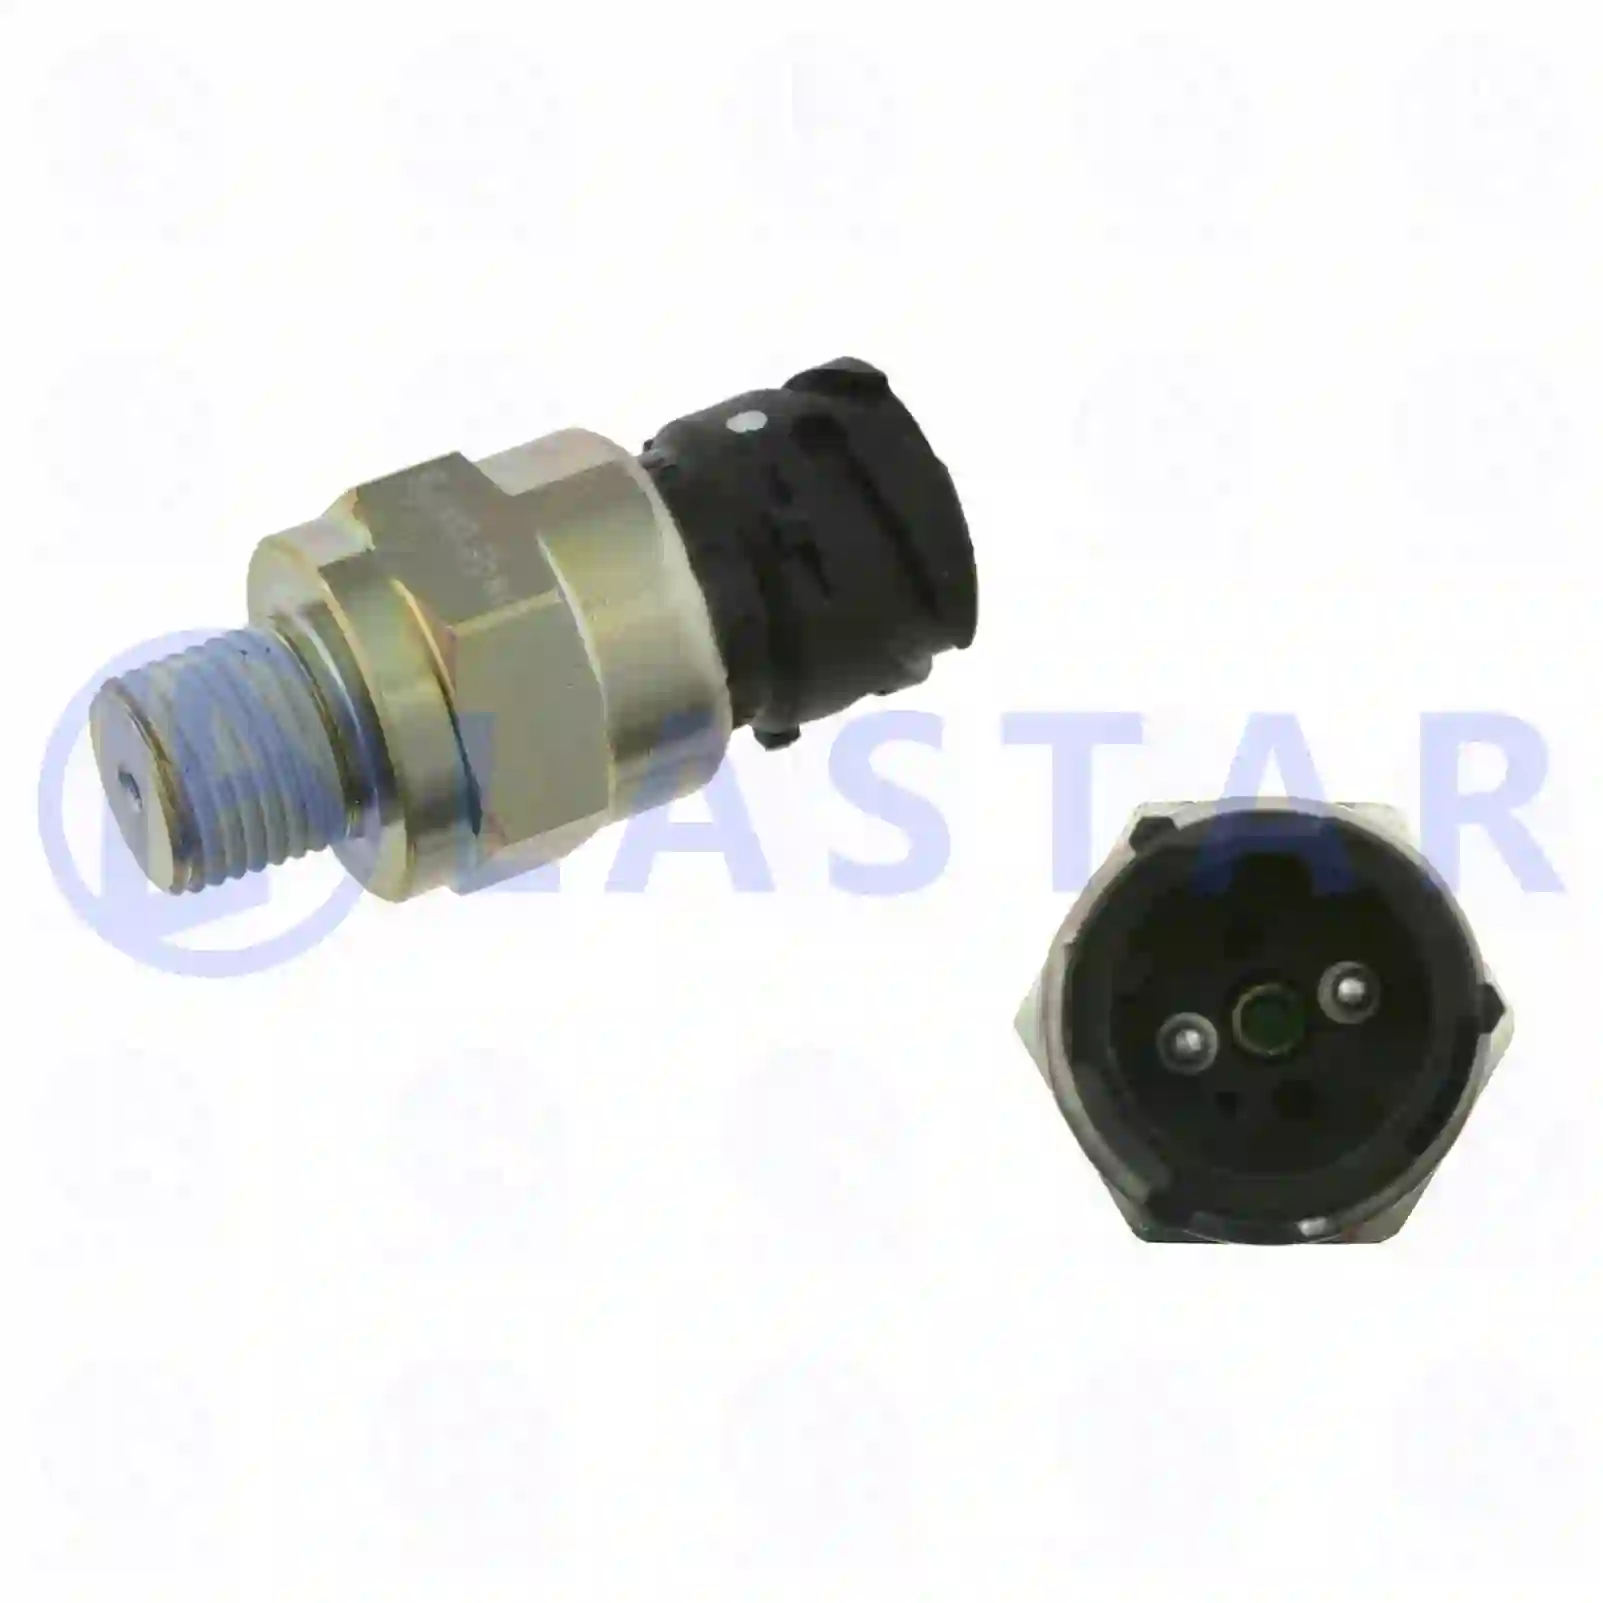 Pressure switch, with adapter cable, 77707622, 1087963, 1594040, 1622986, ZG20761-0008 ||  77707622 Lastar Spare Part | Truck Spare Parts, Auotomotive Spare Parts Pressure switch, with adapter cable, 77707622, 1087963, 1594040, 1622986, ZG20761-0008 ||  77707622 Lastar Spare Part | Truck Spare Parts, Auotomotive Spare Parts